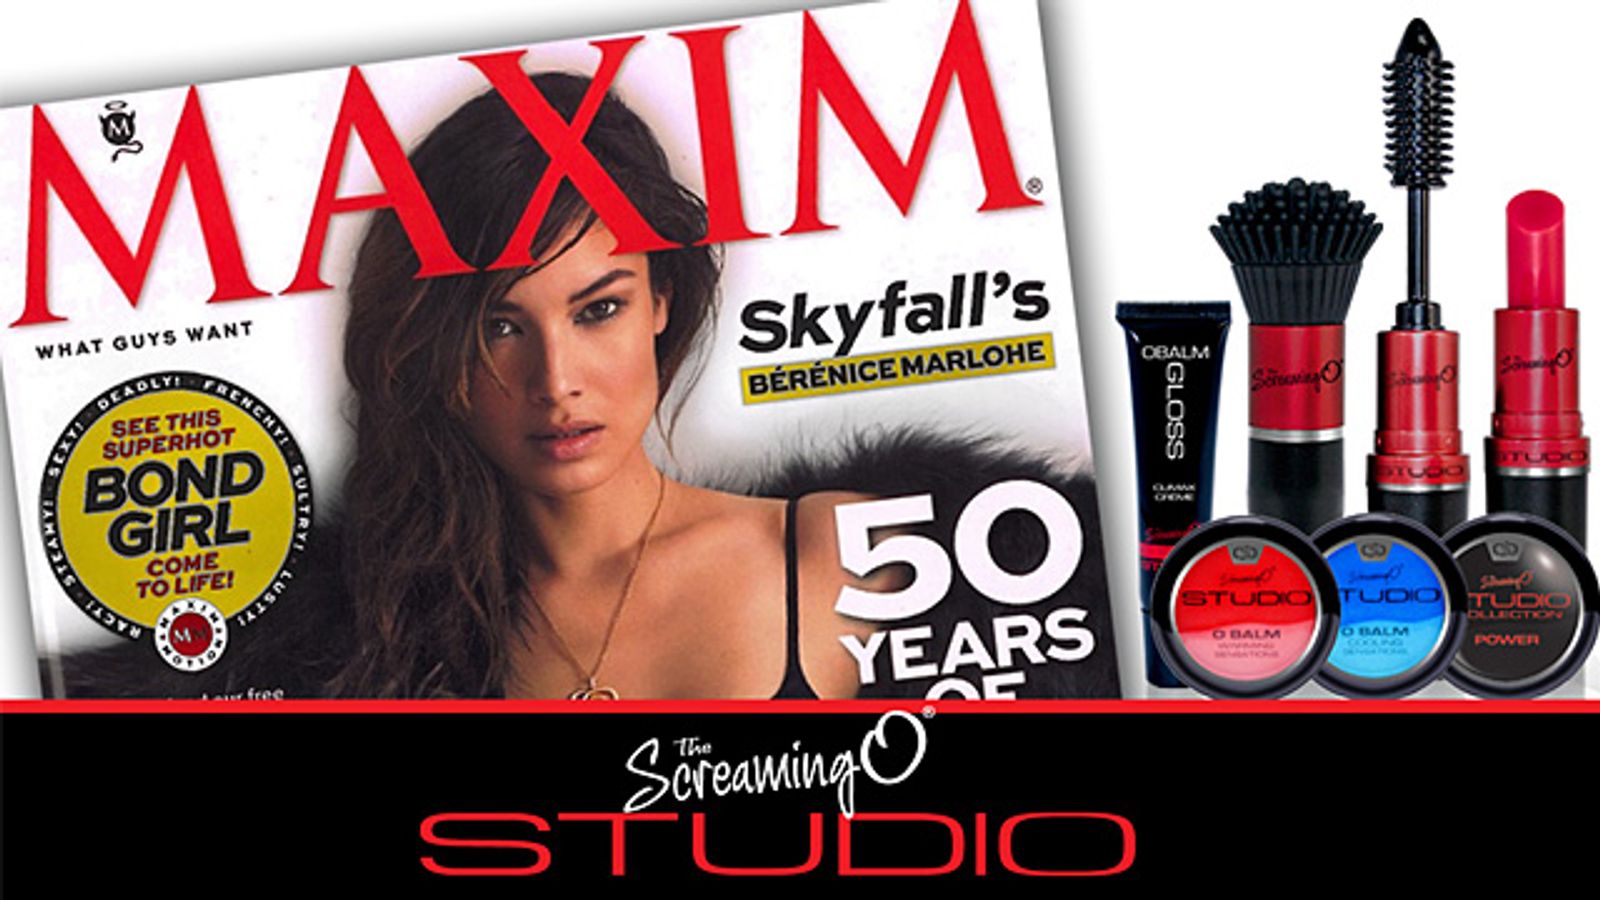 Screaming O Studio Collection Gets Buzz from ‘Manginas’ at Maxim Mag